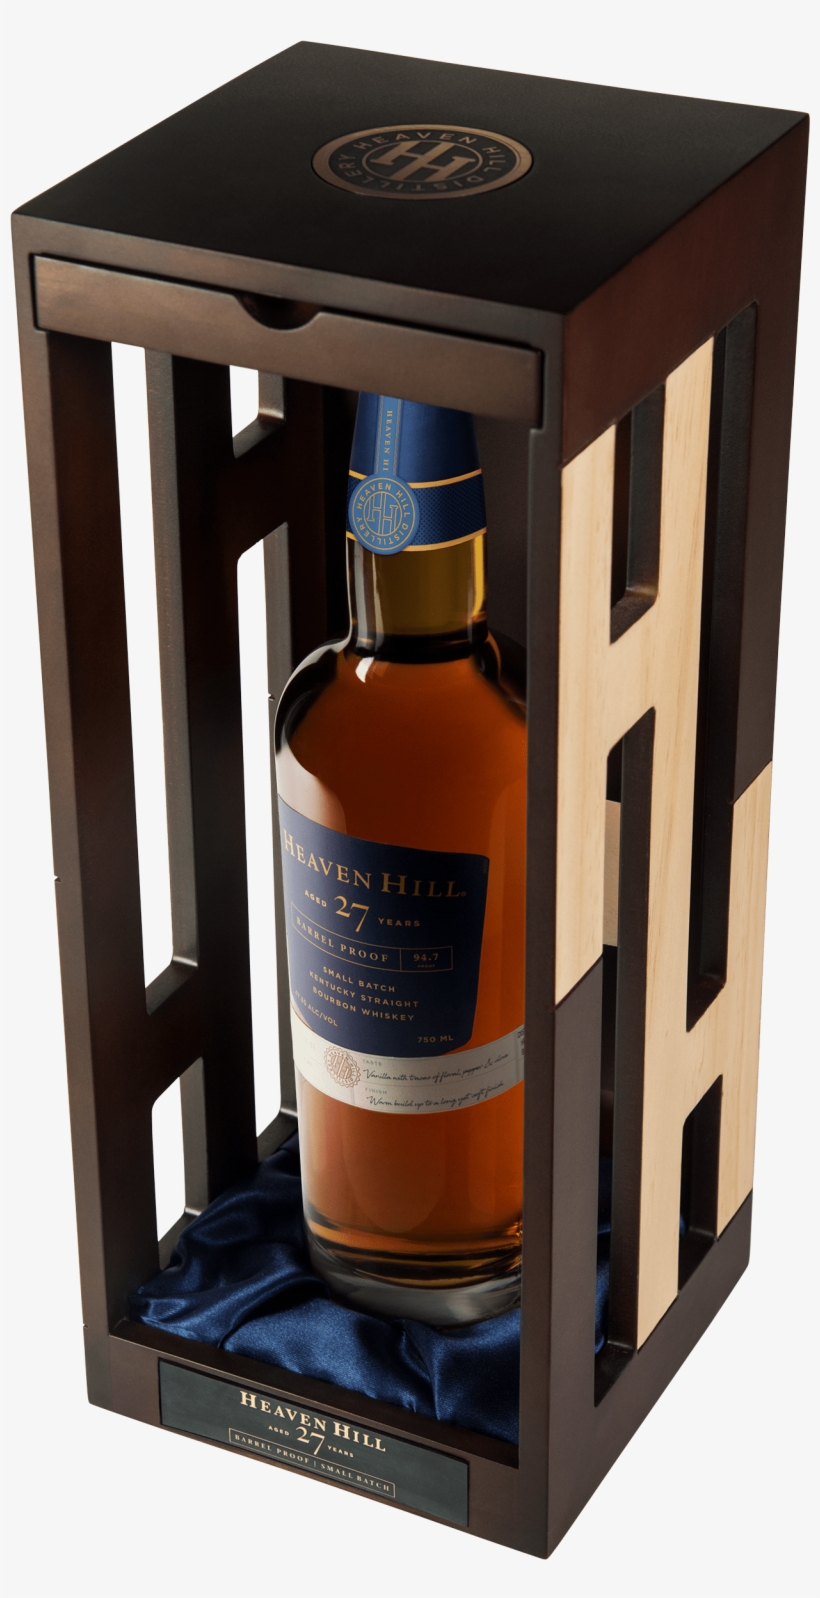 Heaven Hill Distillery Announces Limited Edition Release - Heaven Hill 27 Year Old Barrel Proof, transparent png #9104844